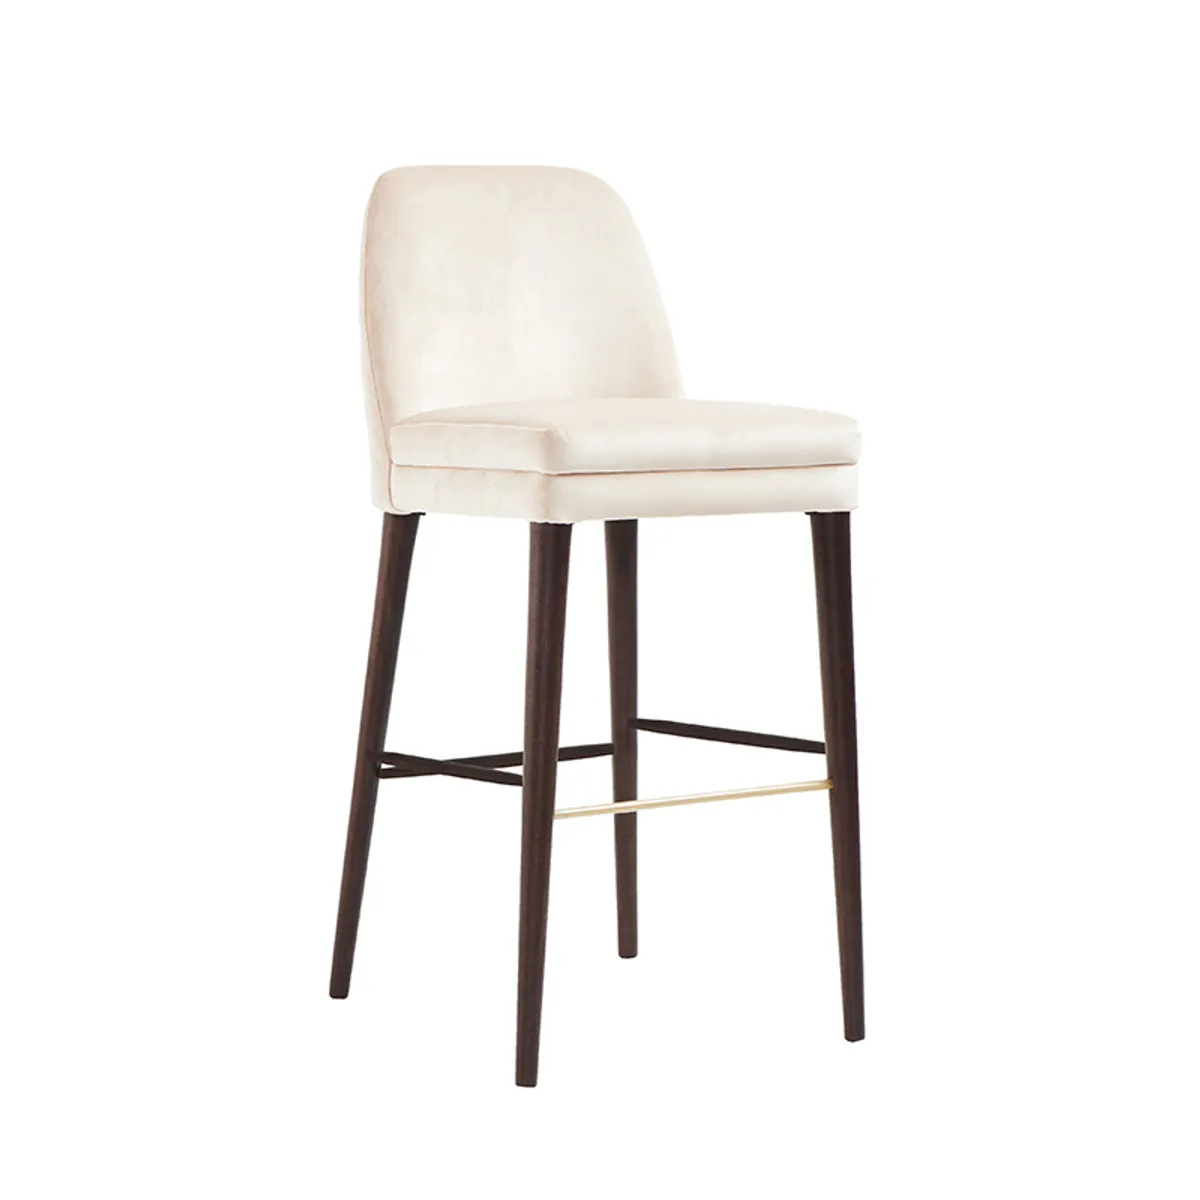 Mitch Bar Stool Upholstered Stool For Bars And Restaurants 090